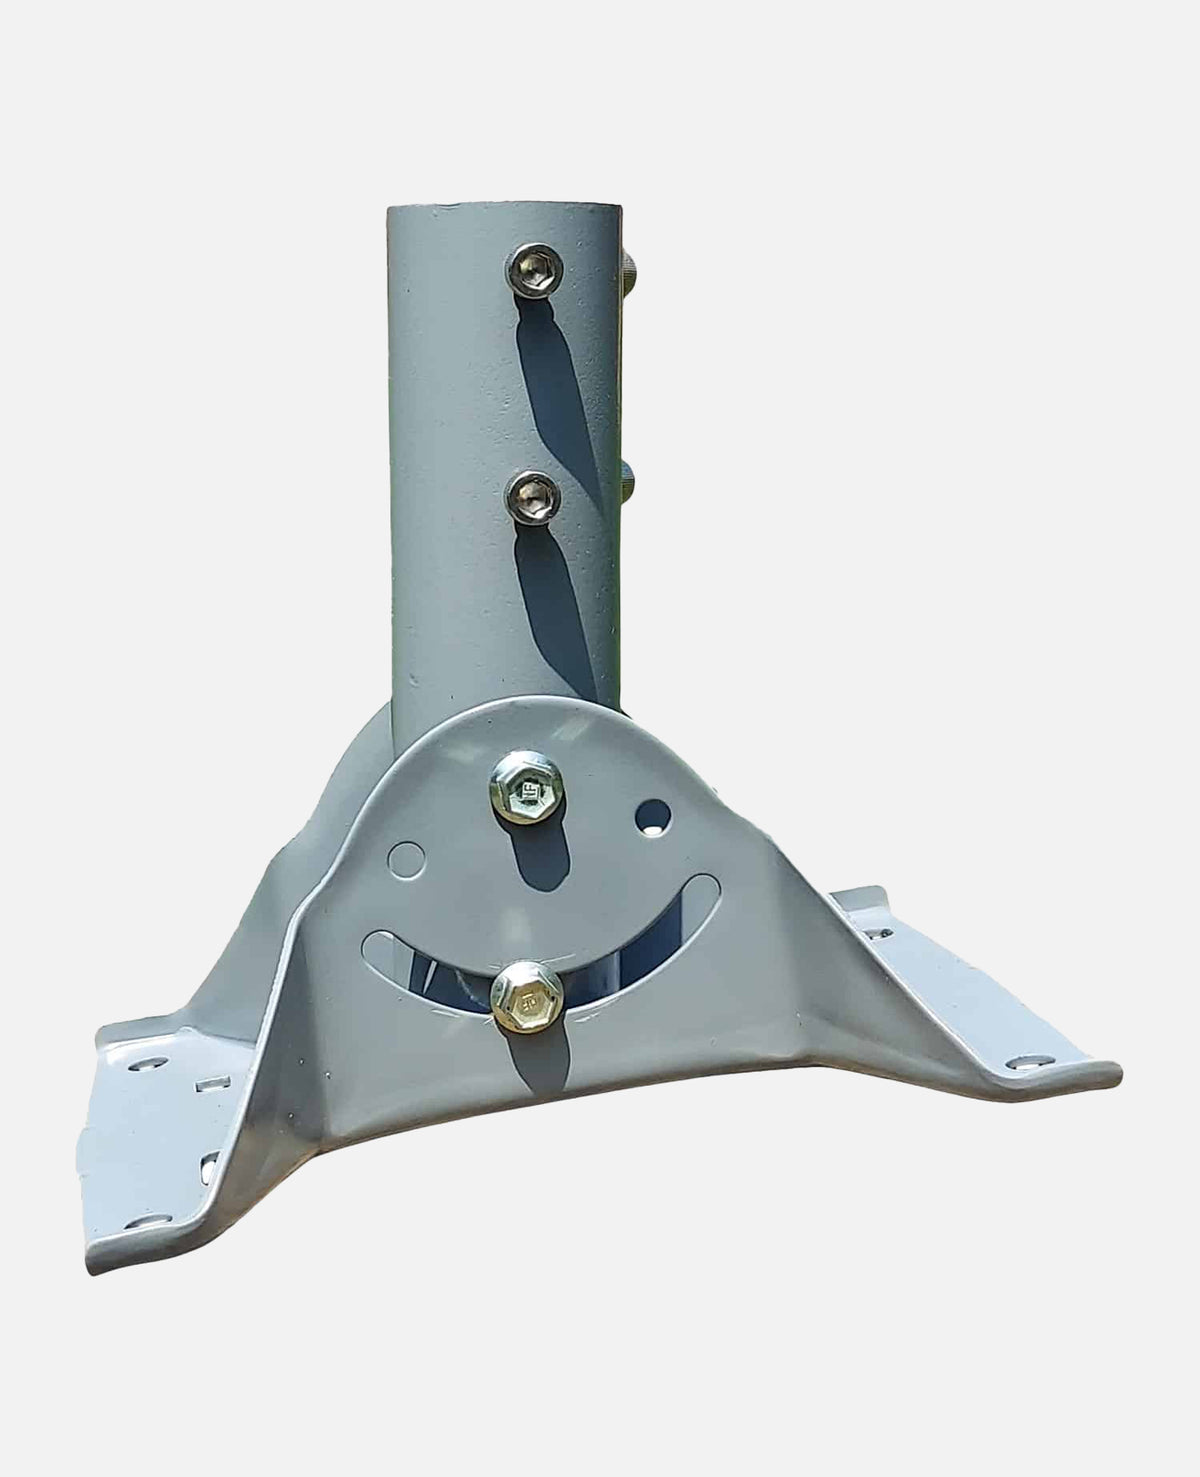 Low Profile 6" Starlink Roof Mount w Swivling Foot for V2 Square Dish